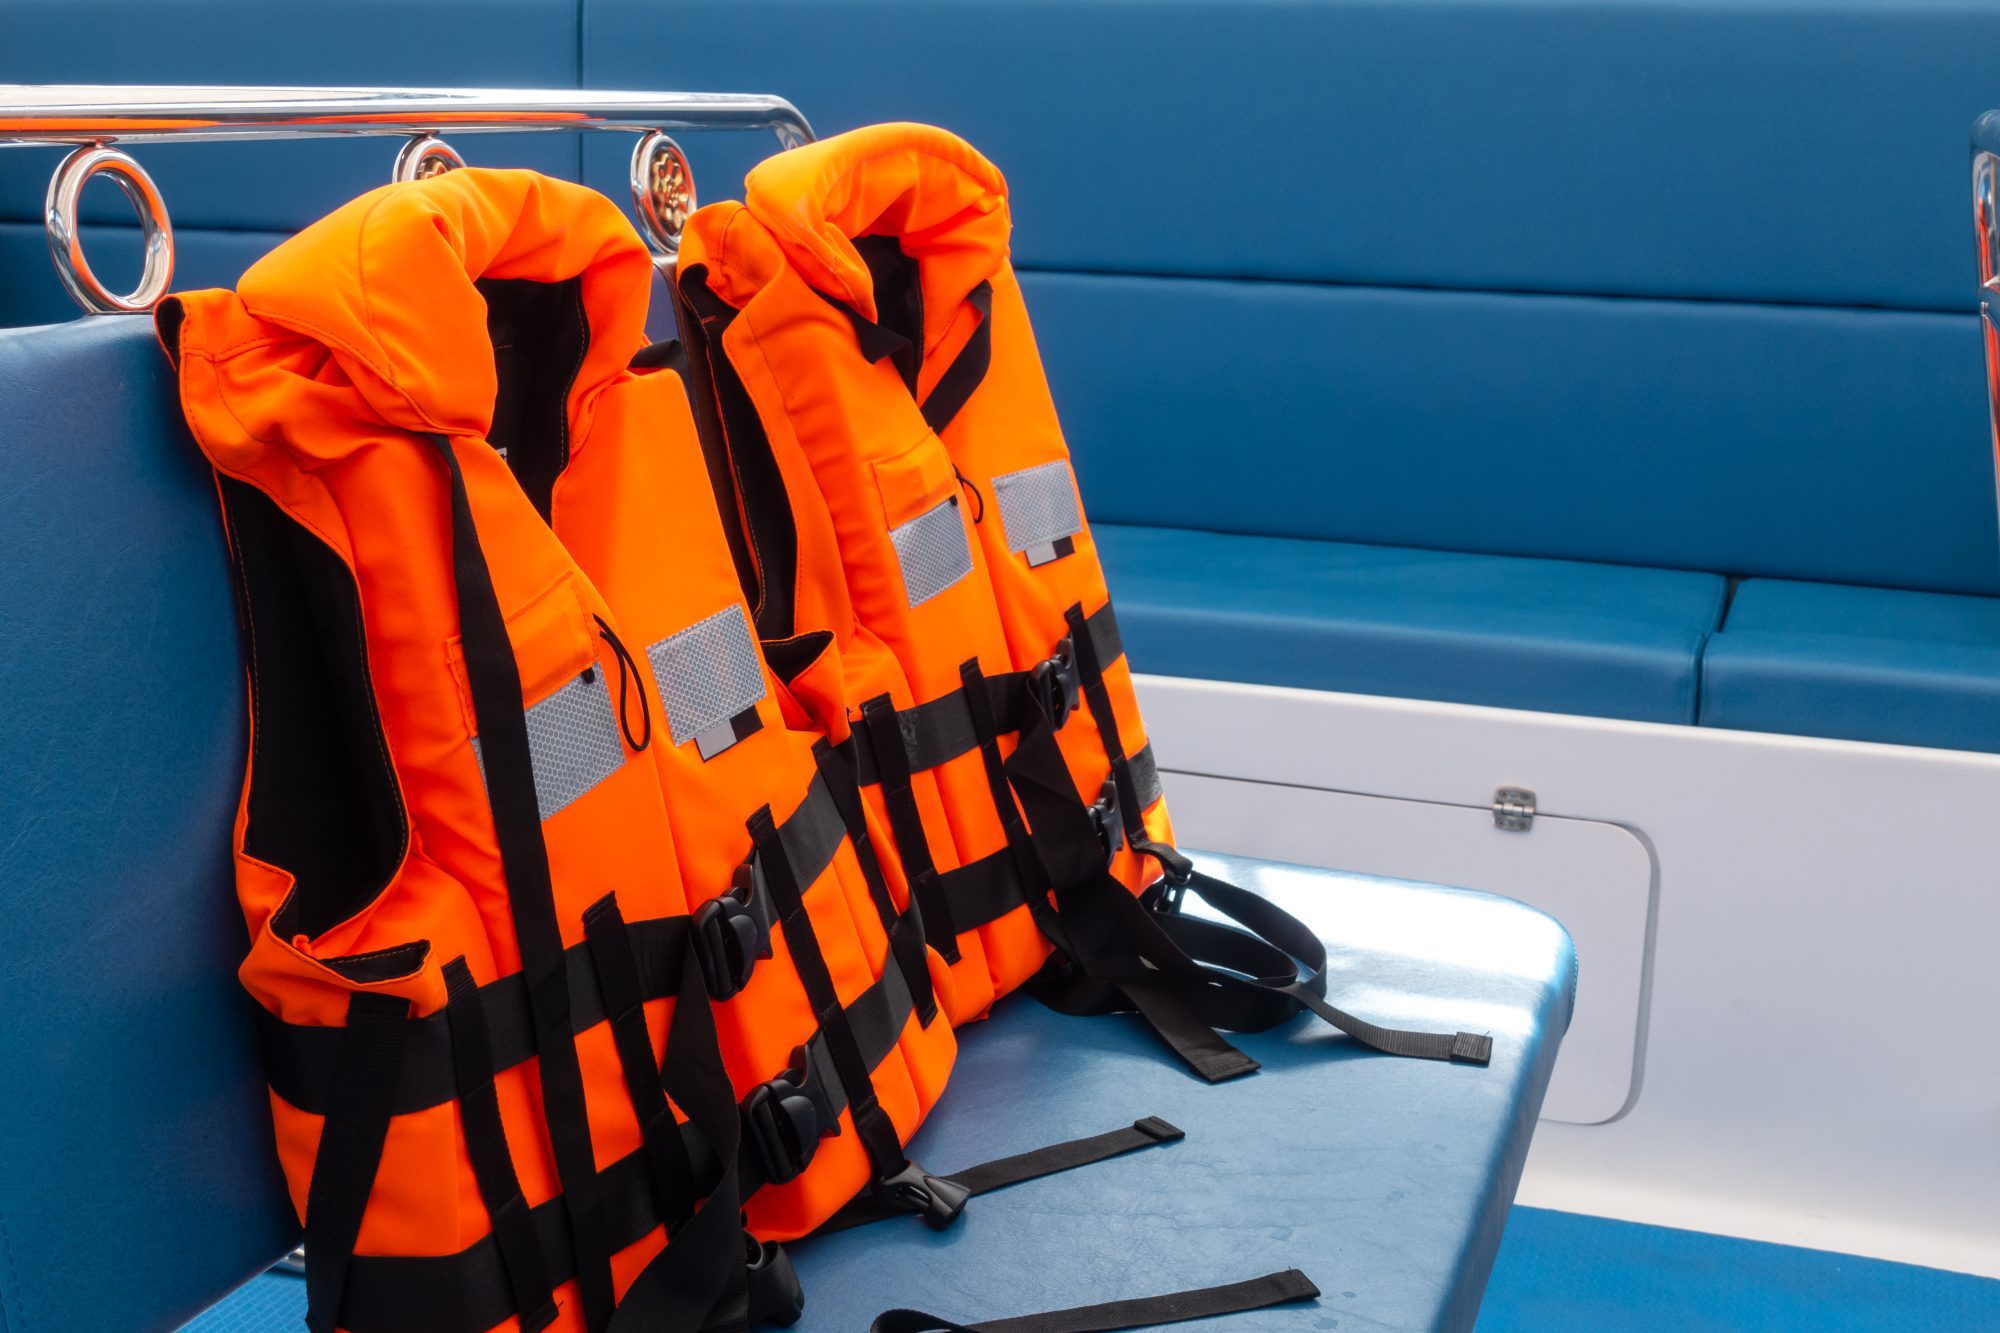 Two personal flotation devices (PFDs) are seen on a boat, indicating safe boating practices by the operator.